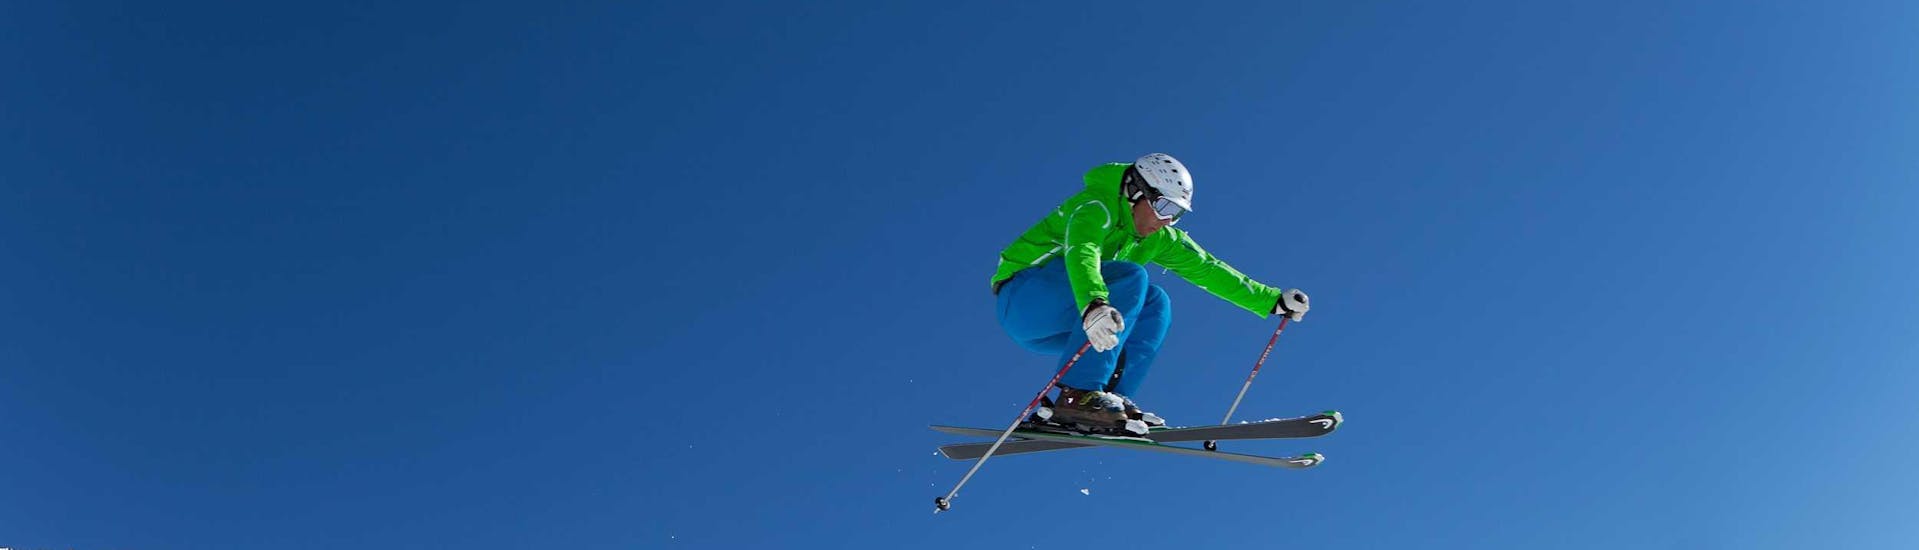 An advanced skier jumping through the air with the help of private ski lessons for adults of all levels with Ski Dome Oberschneider in Kaprun.